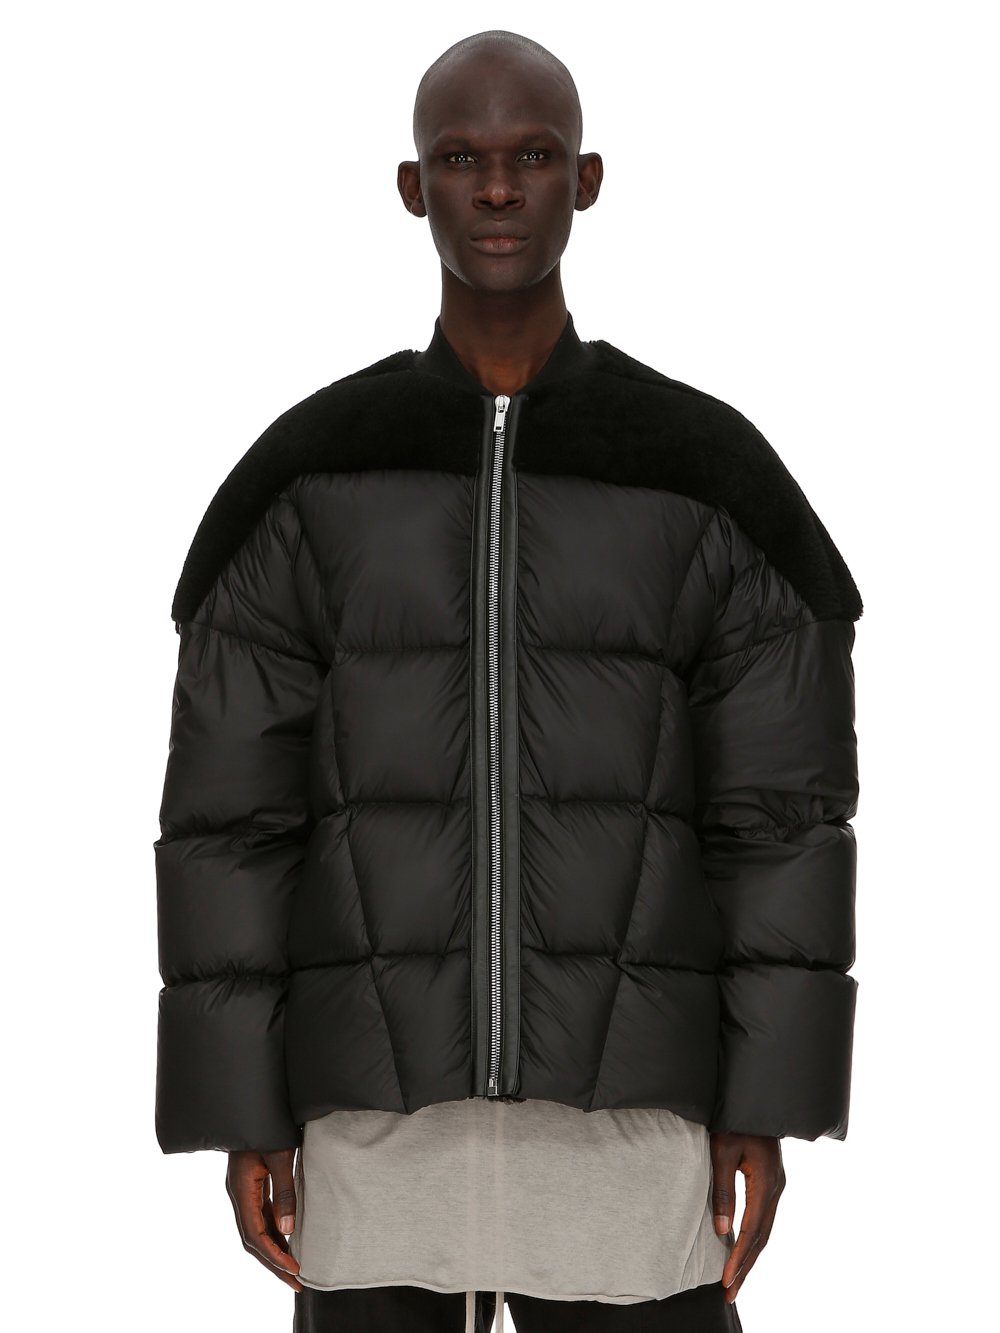 RICK OWENS FW23 LUXOR FLIGHT JKT IN BLACK BUTTER LAMB SHEARLING AND RECYCLED NYLON